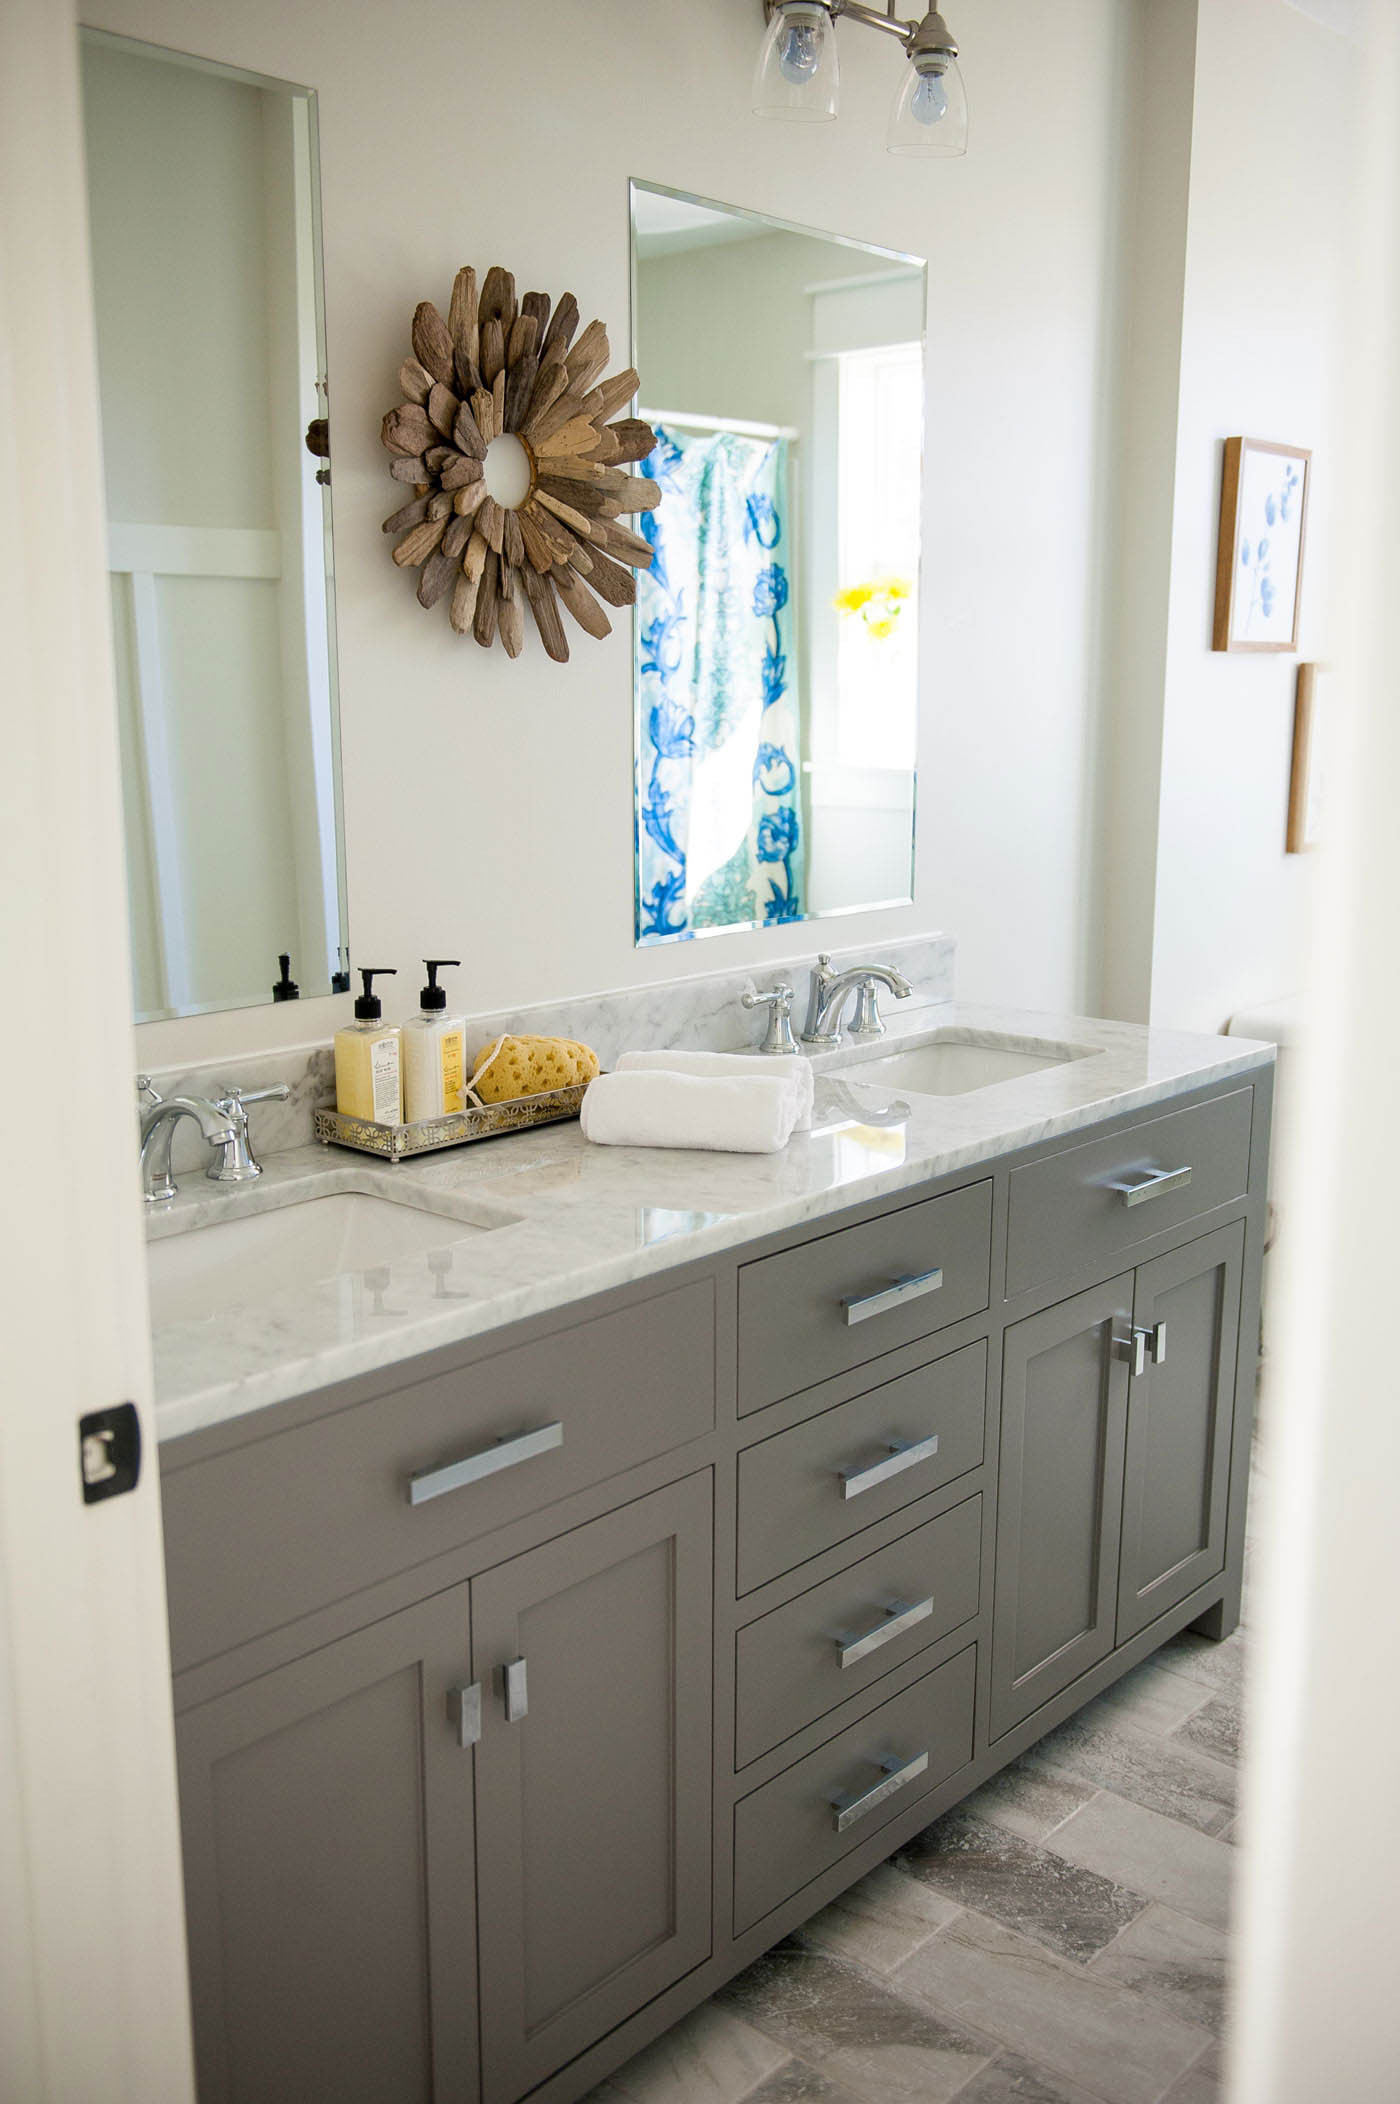 Bathroom Cabinets Ideas
 The Ultimate Guide to Buying a Bathroom Vanity